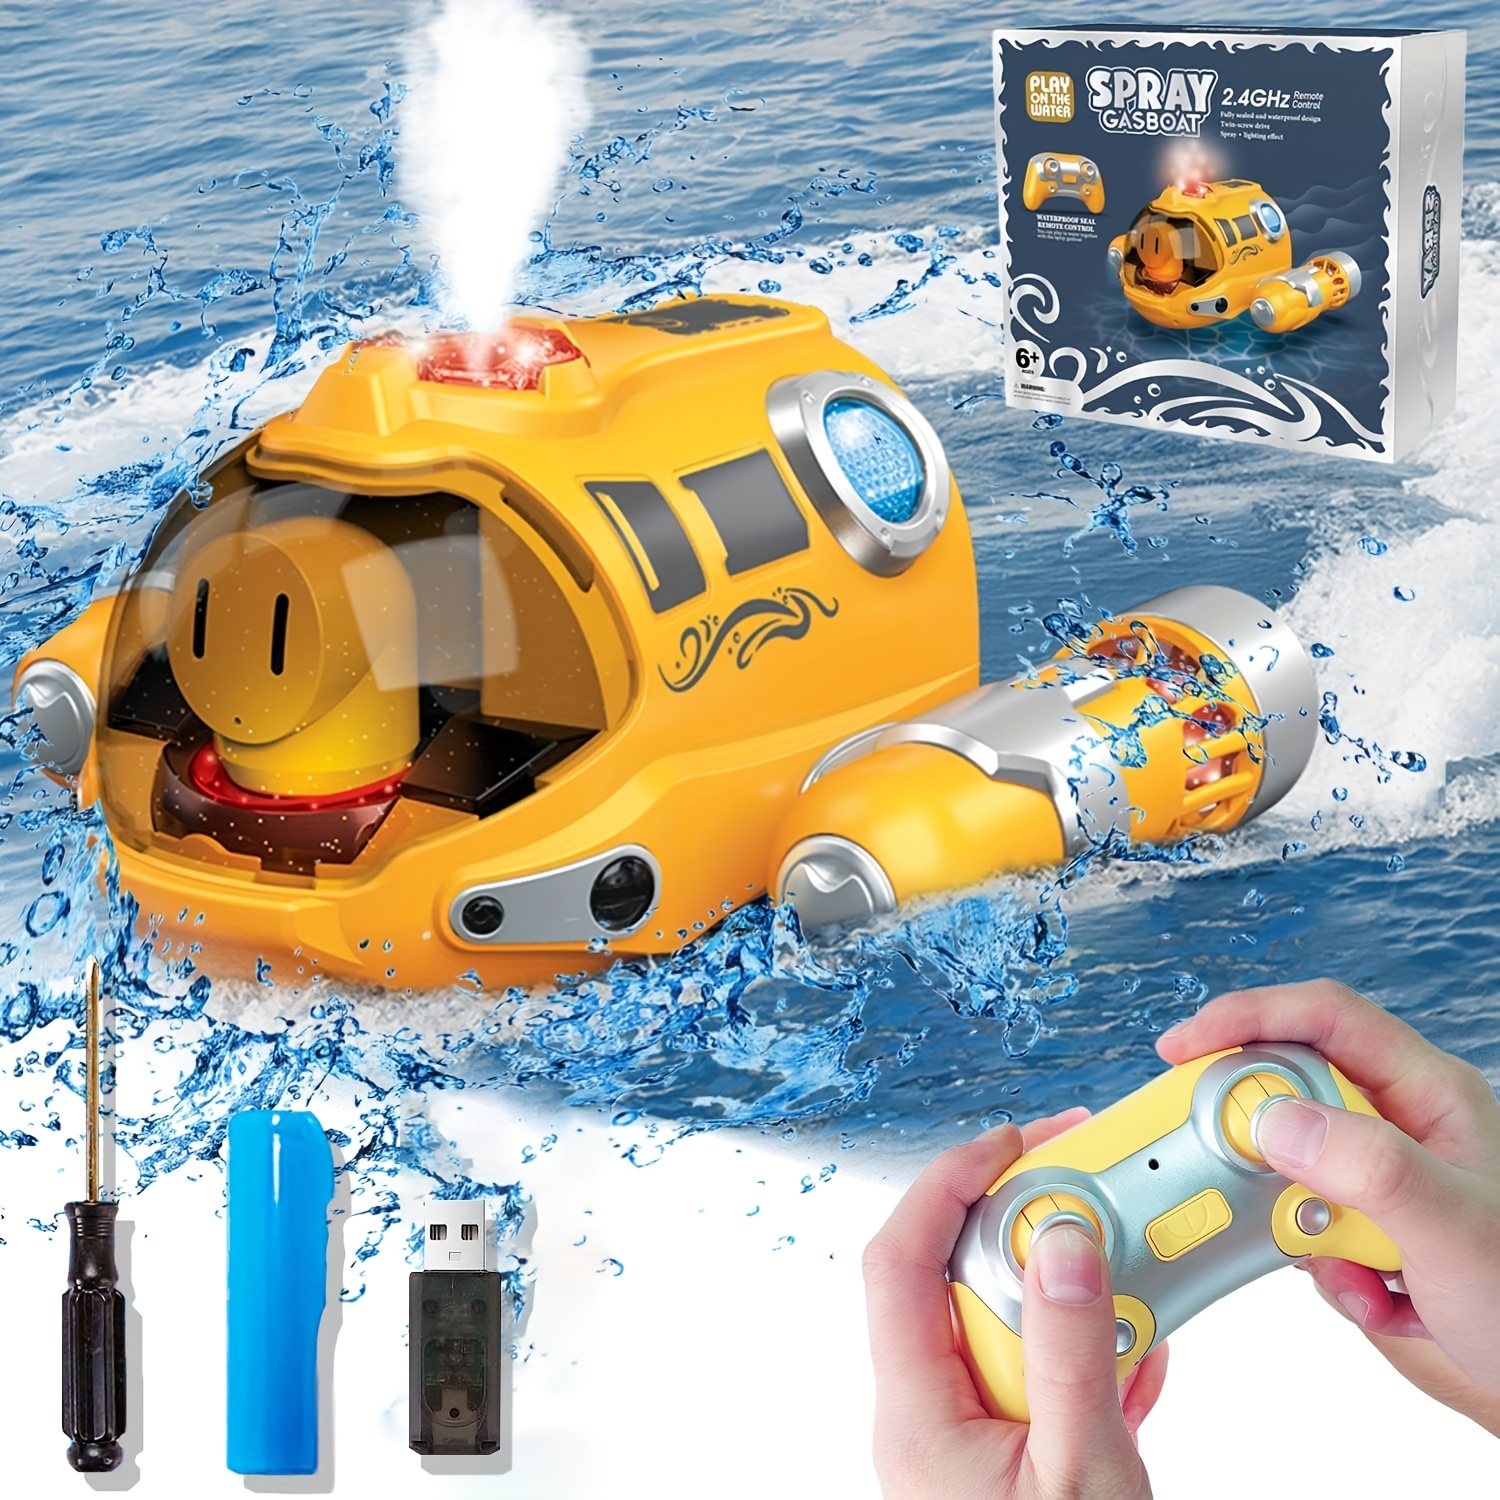 Toddler Bath Toys Bathtub Toy - Kids Floating Water Spray Toy Fun Bathtime  with Boat, Plice Car,Fire Truck and Plane Plastic Toy for Baby Boys and